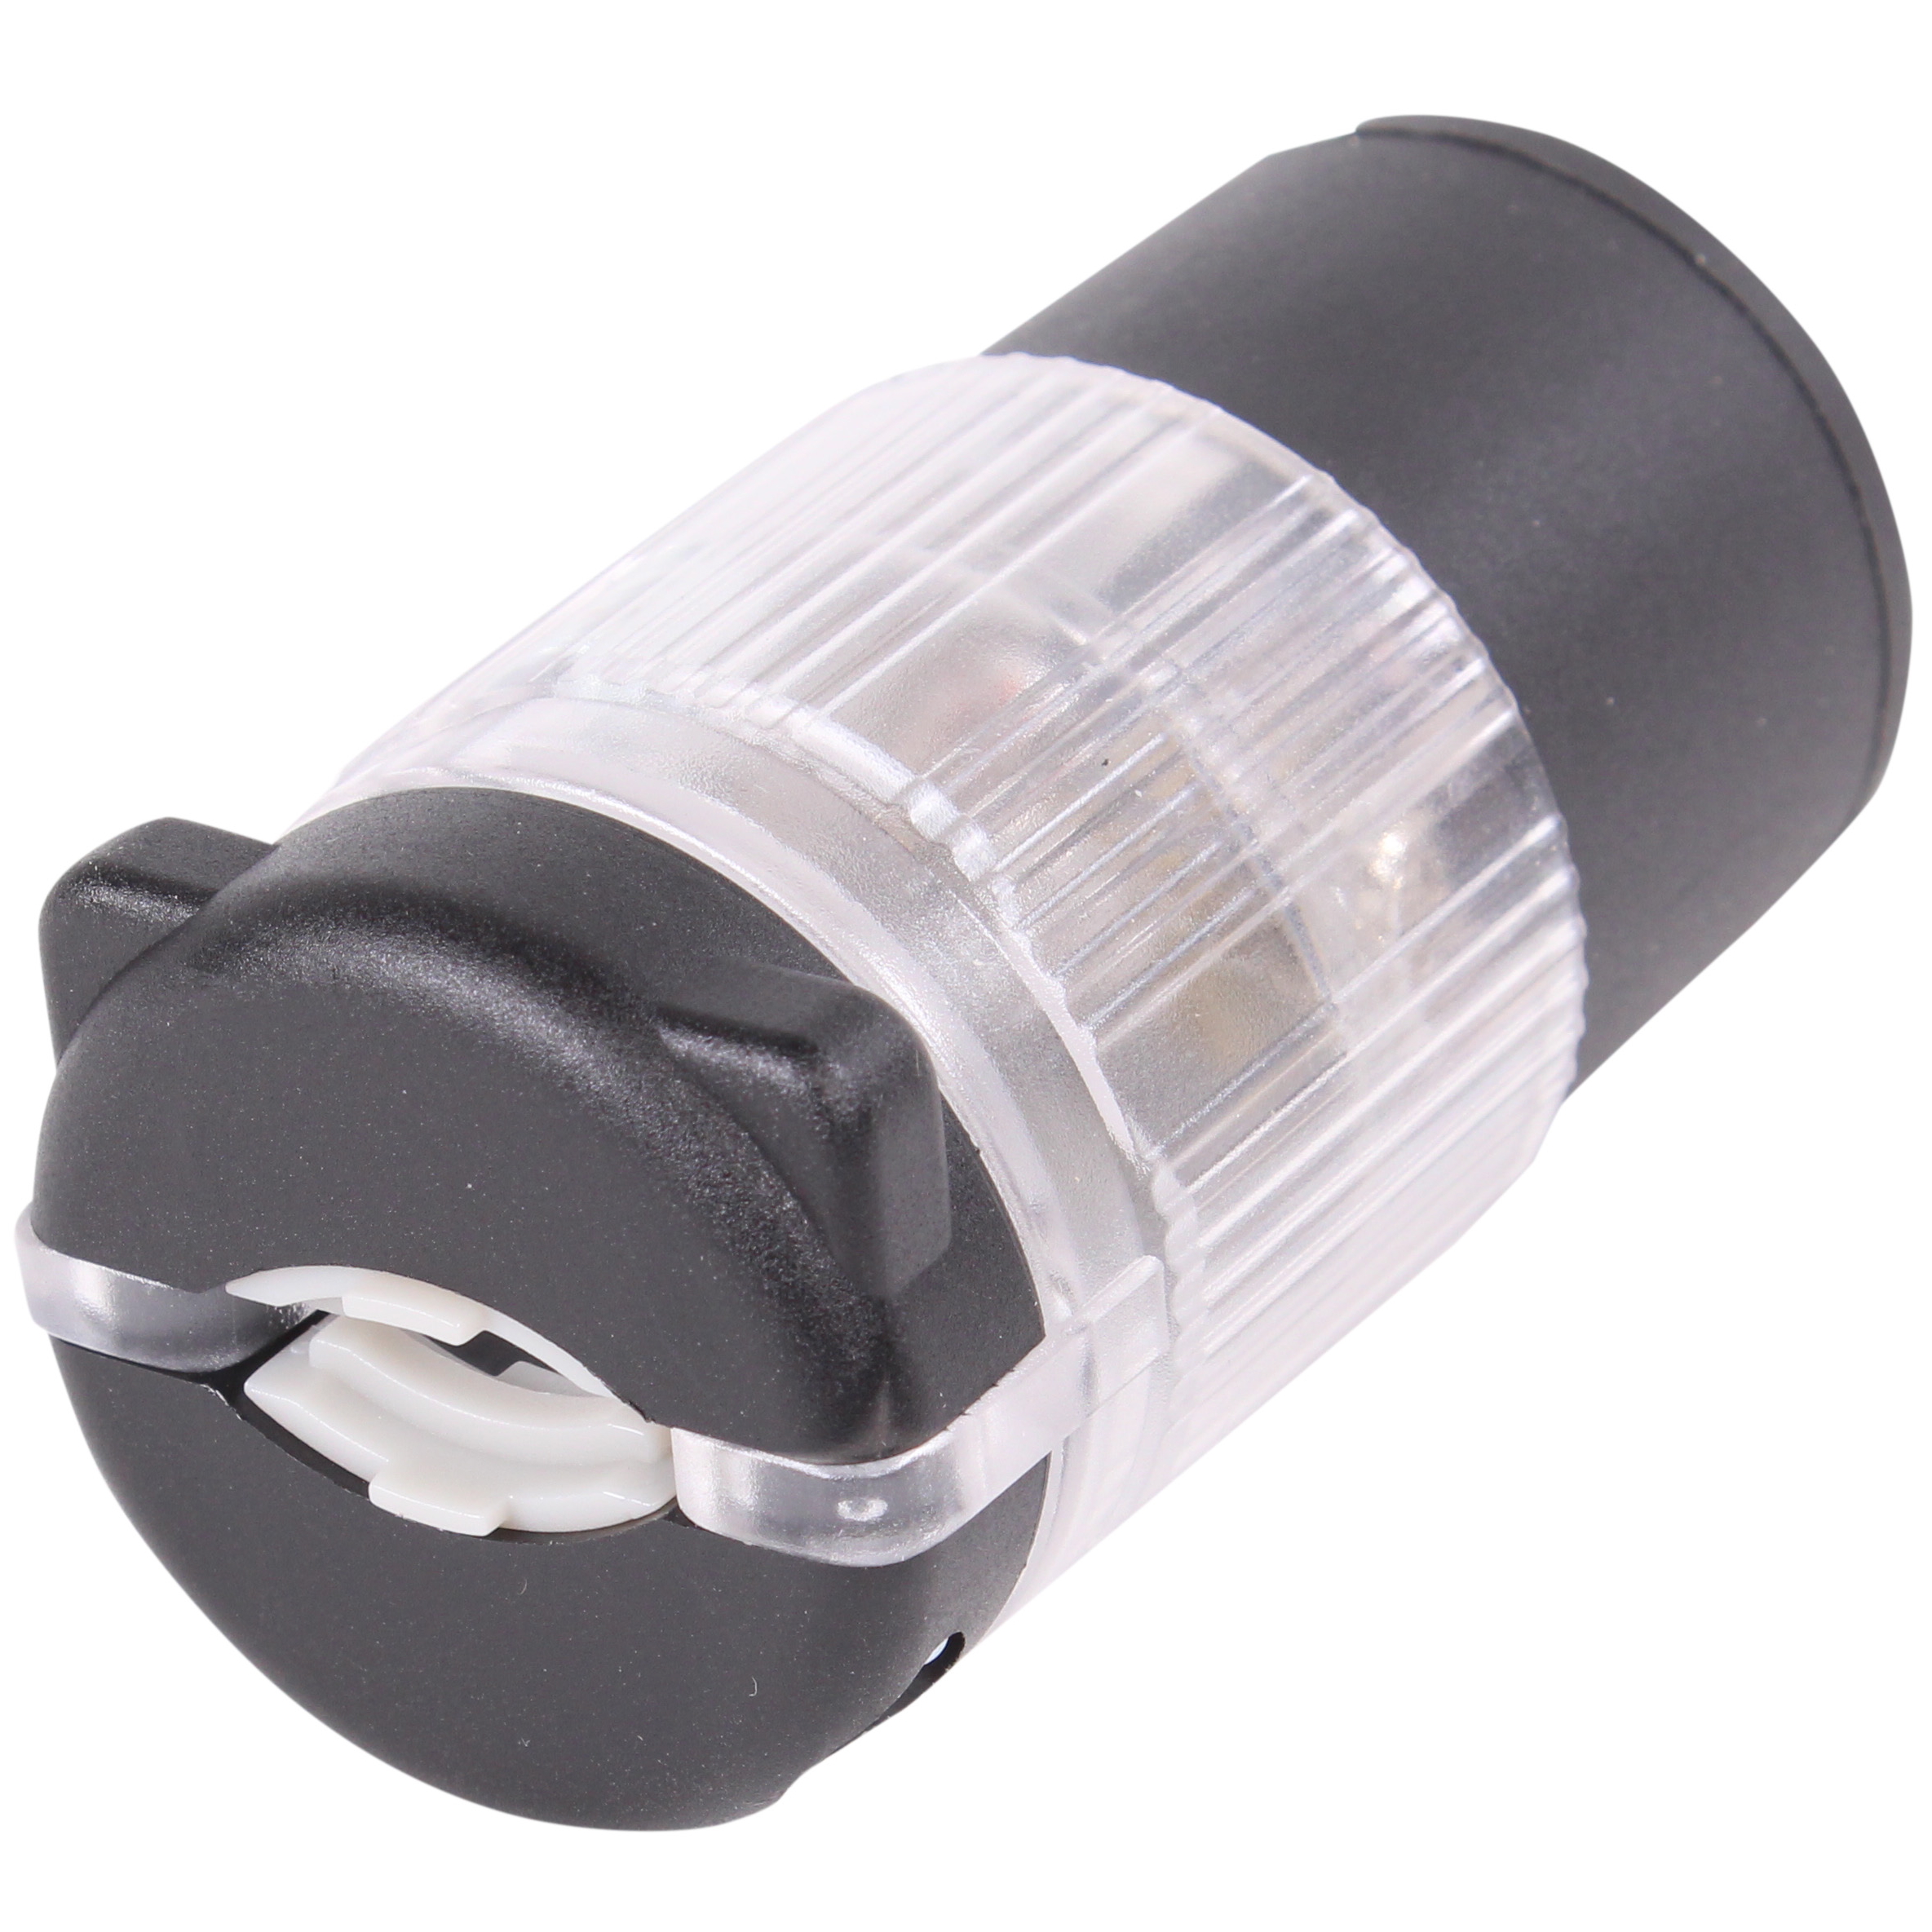 Journeyman-Pro 520CV-LIT Lighted 20 Amp 120-125 Volt, NEMA 5-20R, 2Pole 3Wire, Straight Blade, Female Plug Replacement Cord Connector Outlet, Commercial Grade PVC Power Indicating (BLACK LIT 1-PACK) - image 2 of 5